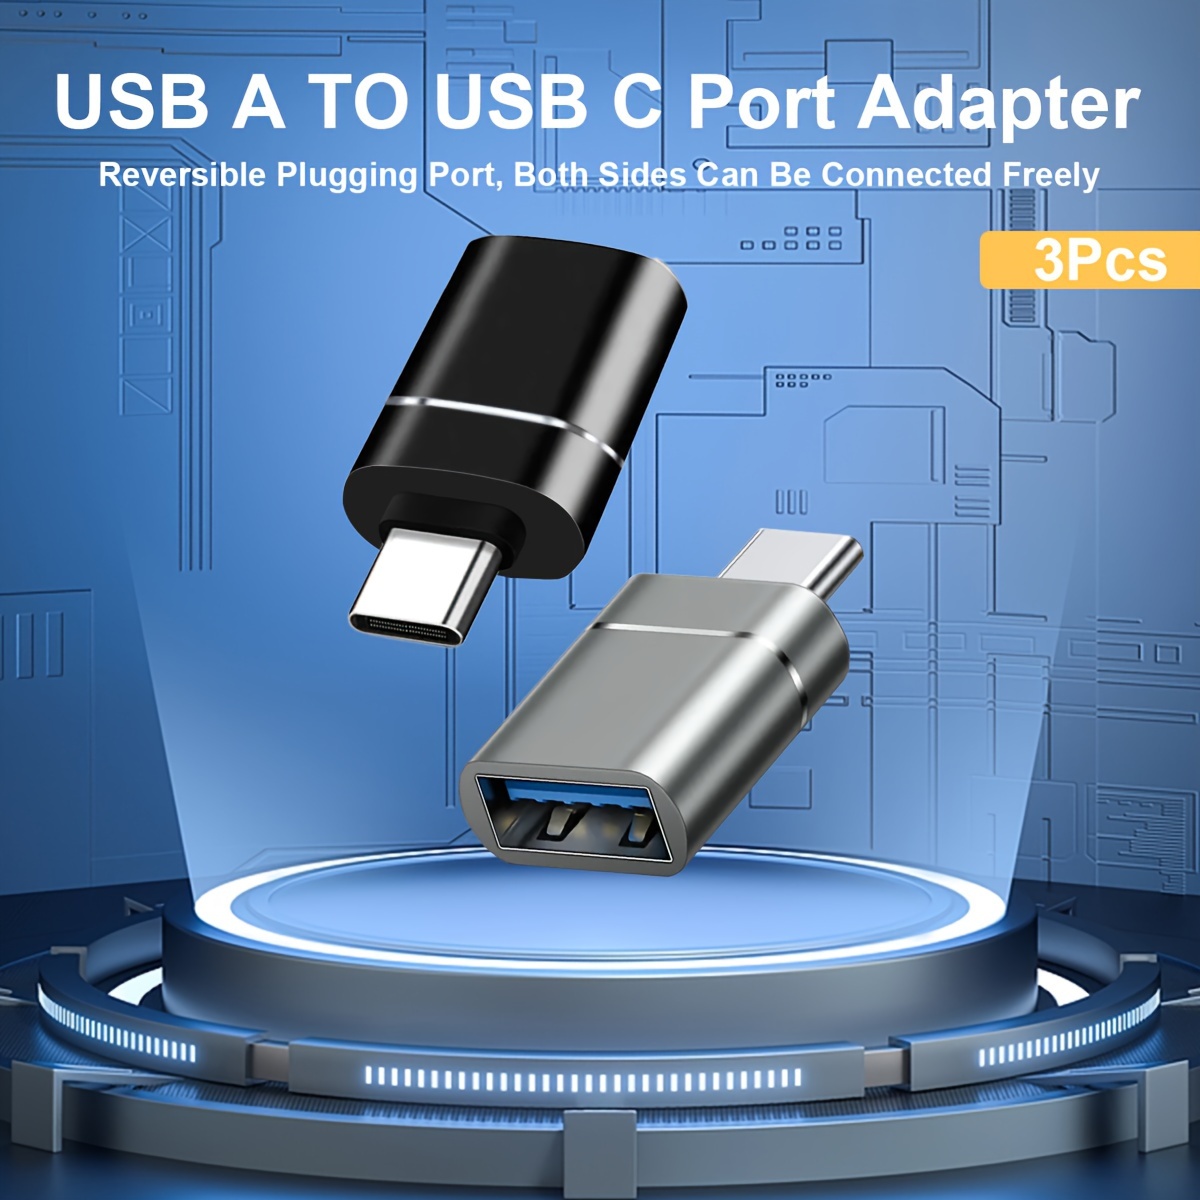 usb c to usb adapter 3 pack usb c male to usb 3 0 female adapter compatibllity for imac 2021 for ipad pro 2021 for macbook pro 2020 for macbook air 2020 and other type c or thunderbolt 3 devices